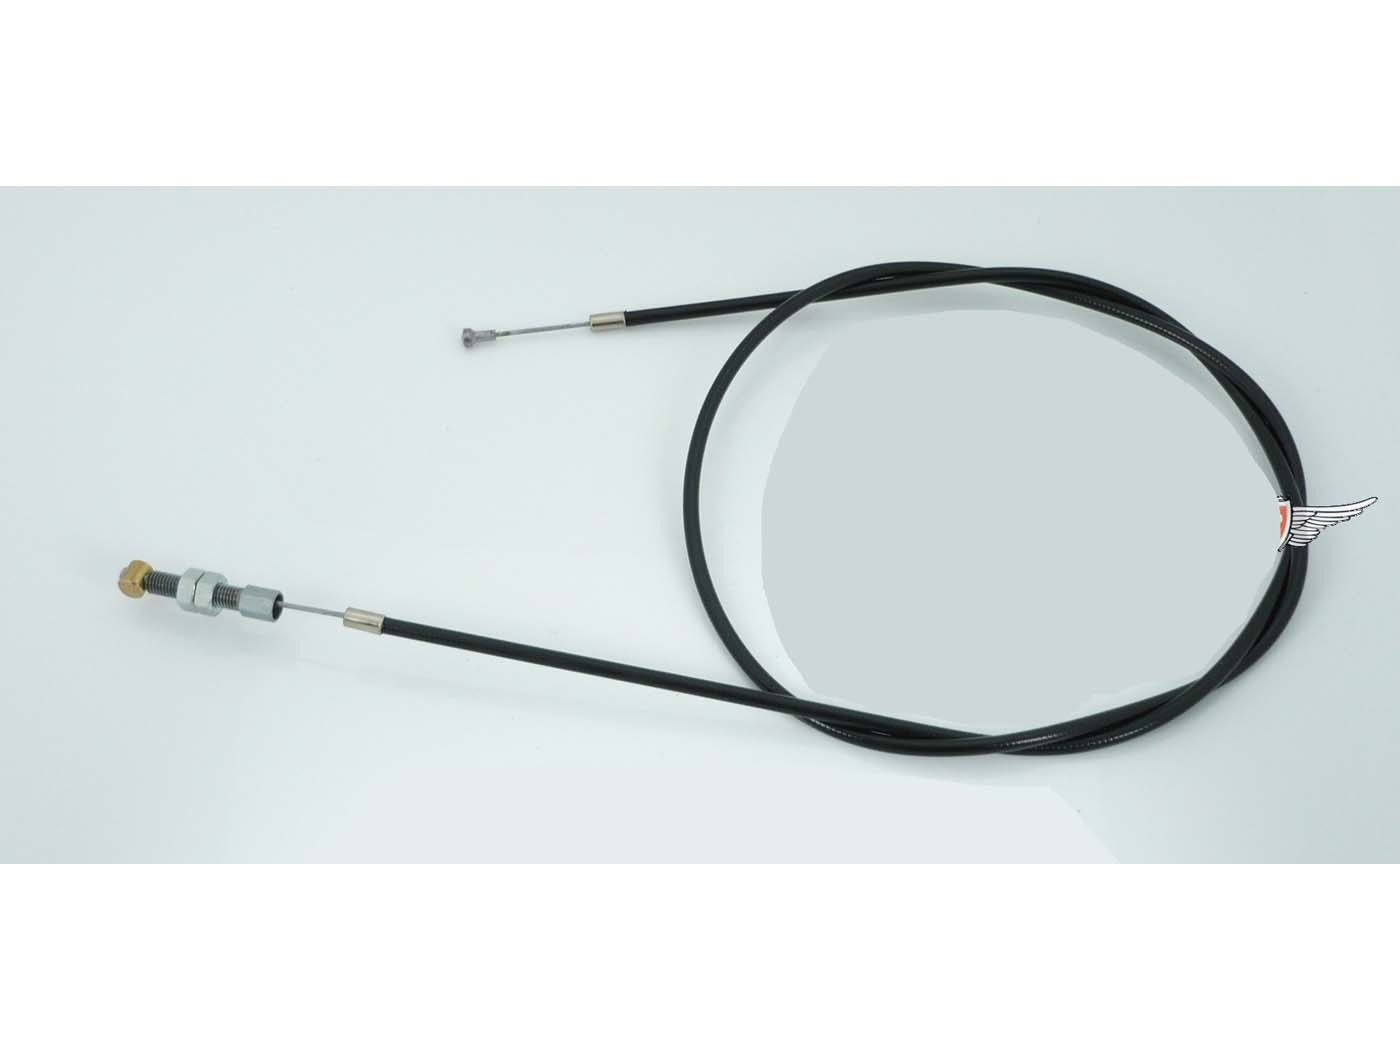 Handbrake Cable, Ready To Install For Puch DS 50 L, Zündapp Models